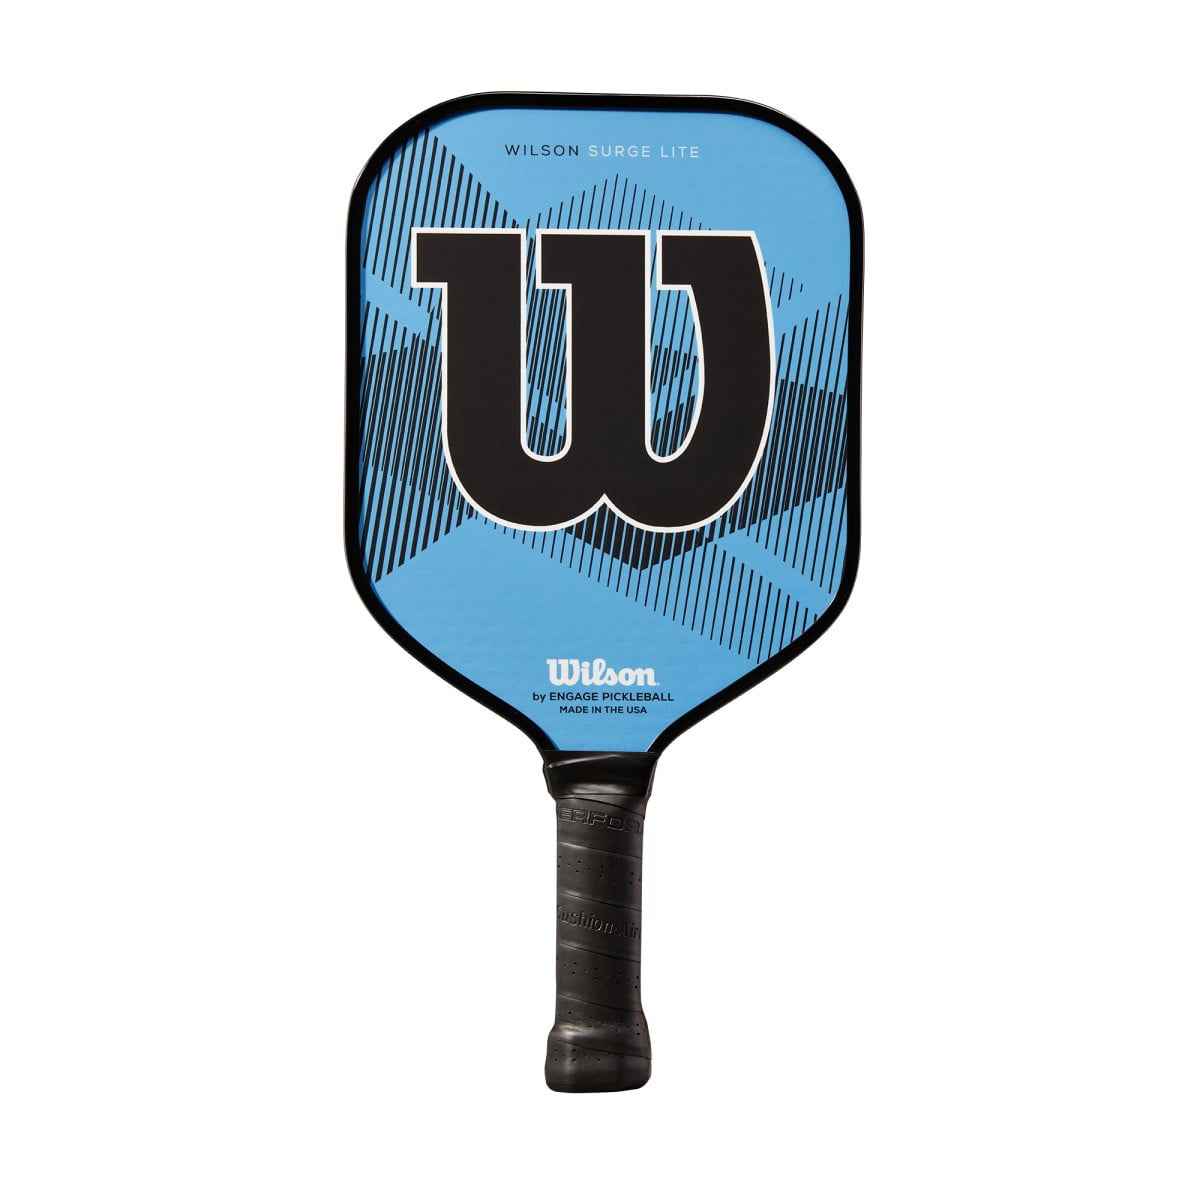 Authorized Dealer with Warranty Wilson SURGE Pickleball Paddle Racket 